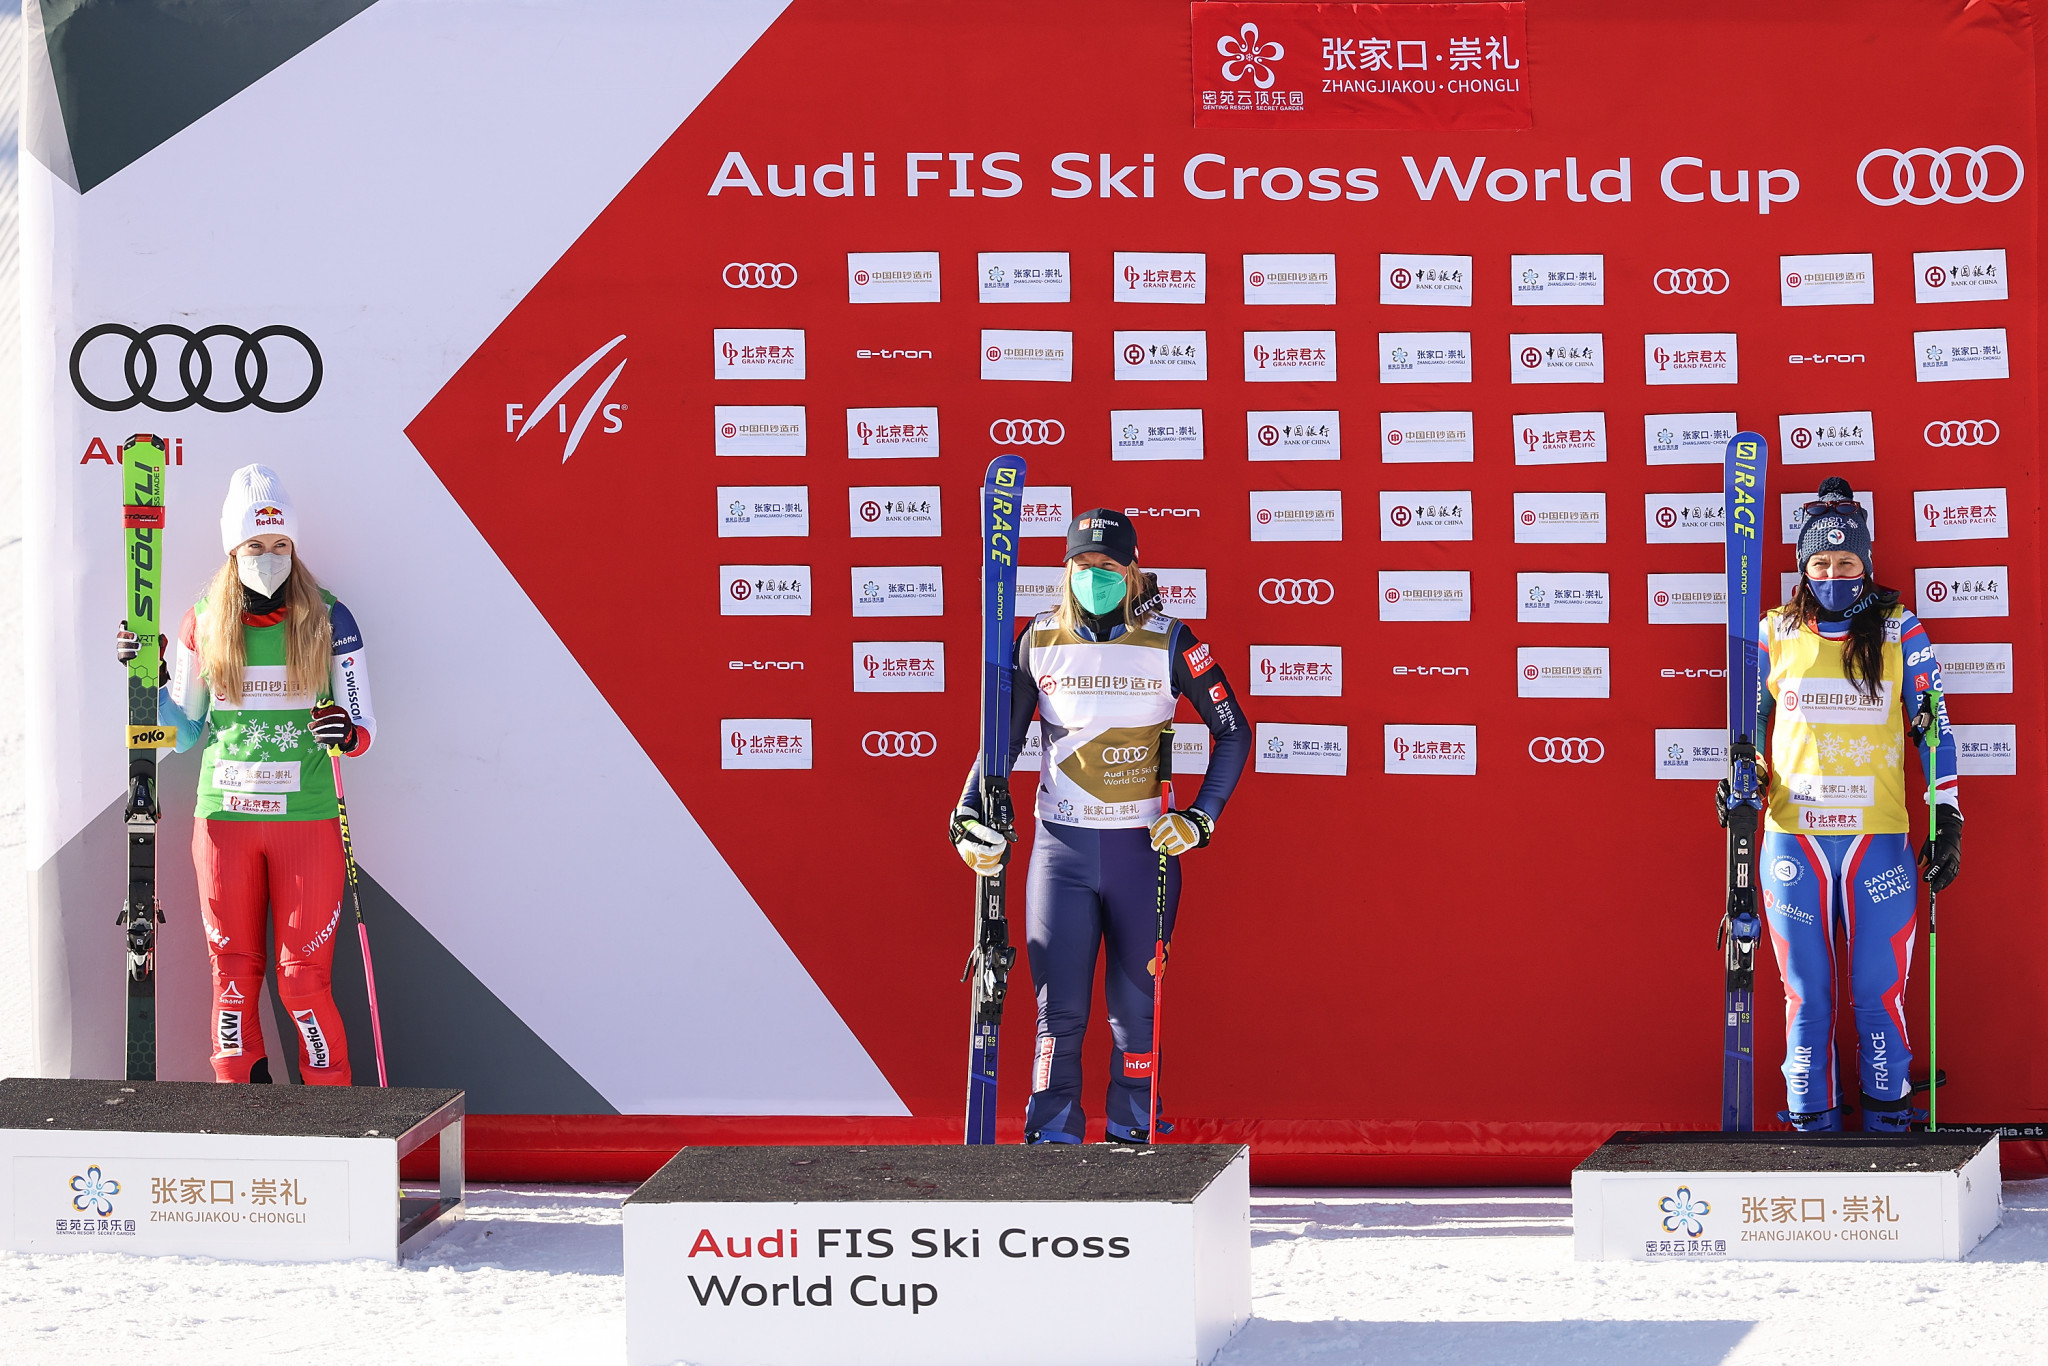 Switzerland's Fanny Smith, left, Sandra Näslund of Sweden, centre, and Marielle Berger Sabbatel of France, right, all finished on the podium at the first FIS Ski Cross World Cup event of the season ©Getty Images